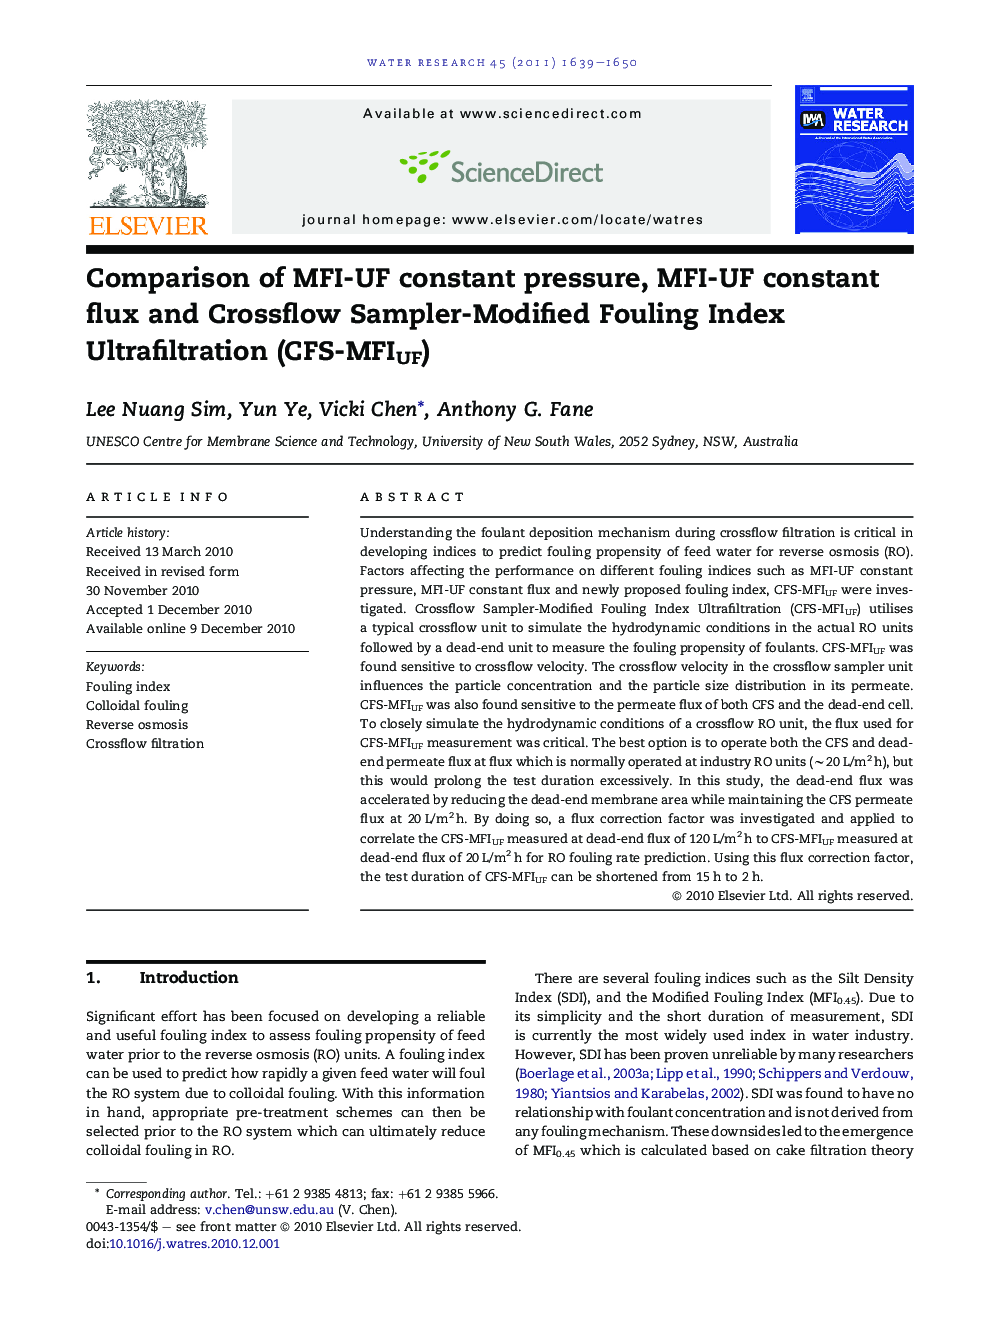 Comparison of MFI-UF constant pressure, MFI-UF constant flux and Crossflow Sampler-Modified Fouling Index Ultrafiltration (CFS-MFIUF)